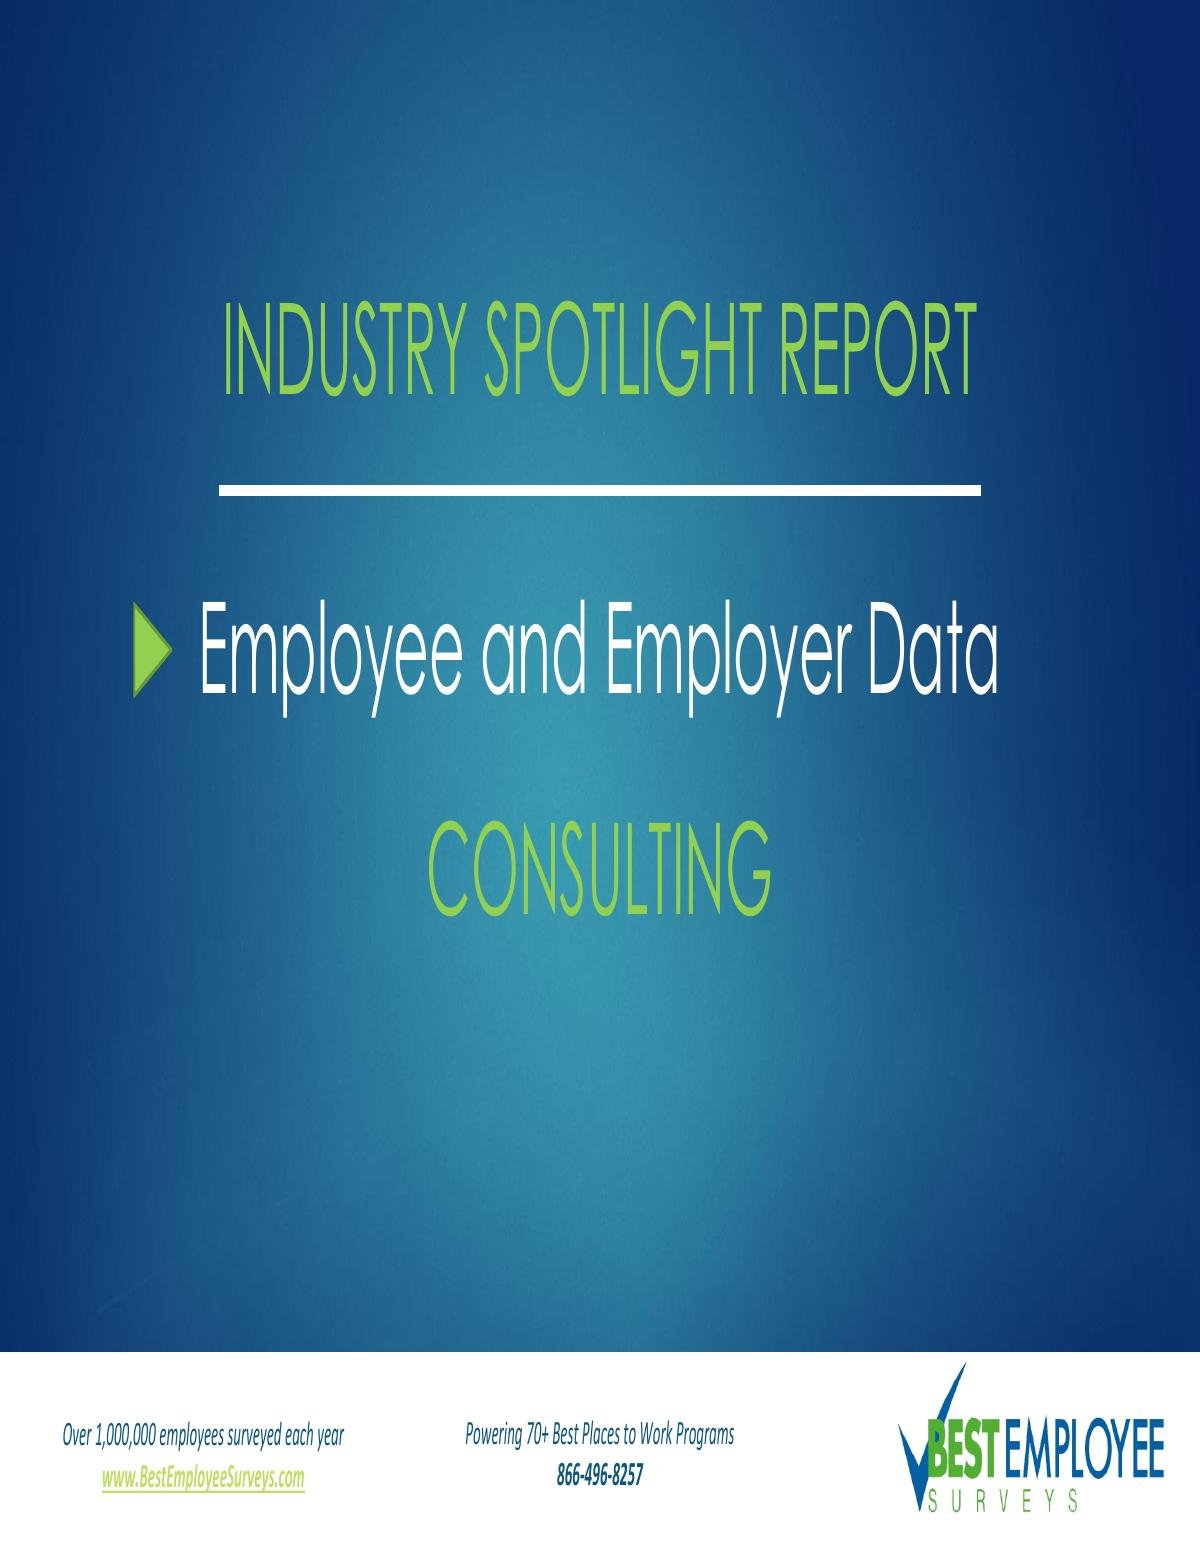 2019 Employee Engagement and Satisfaction Report: Consulting